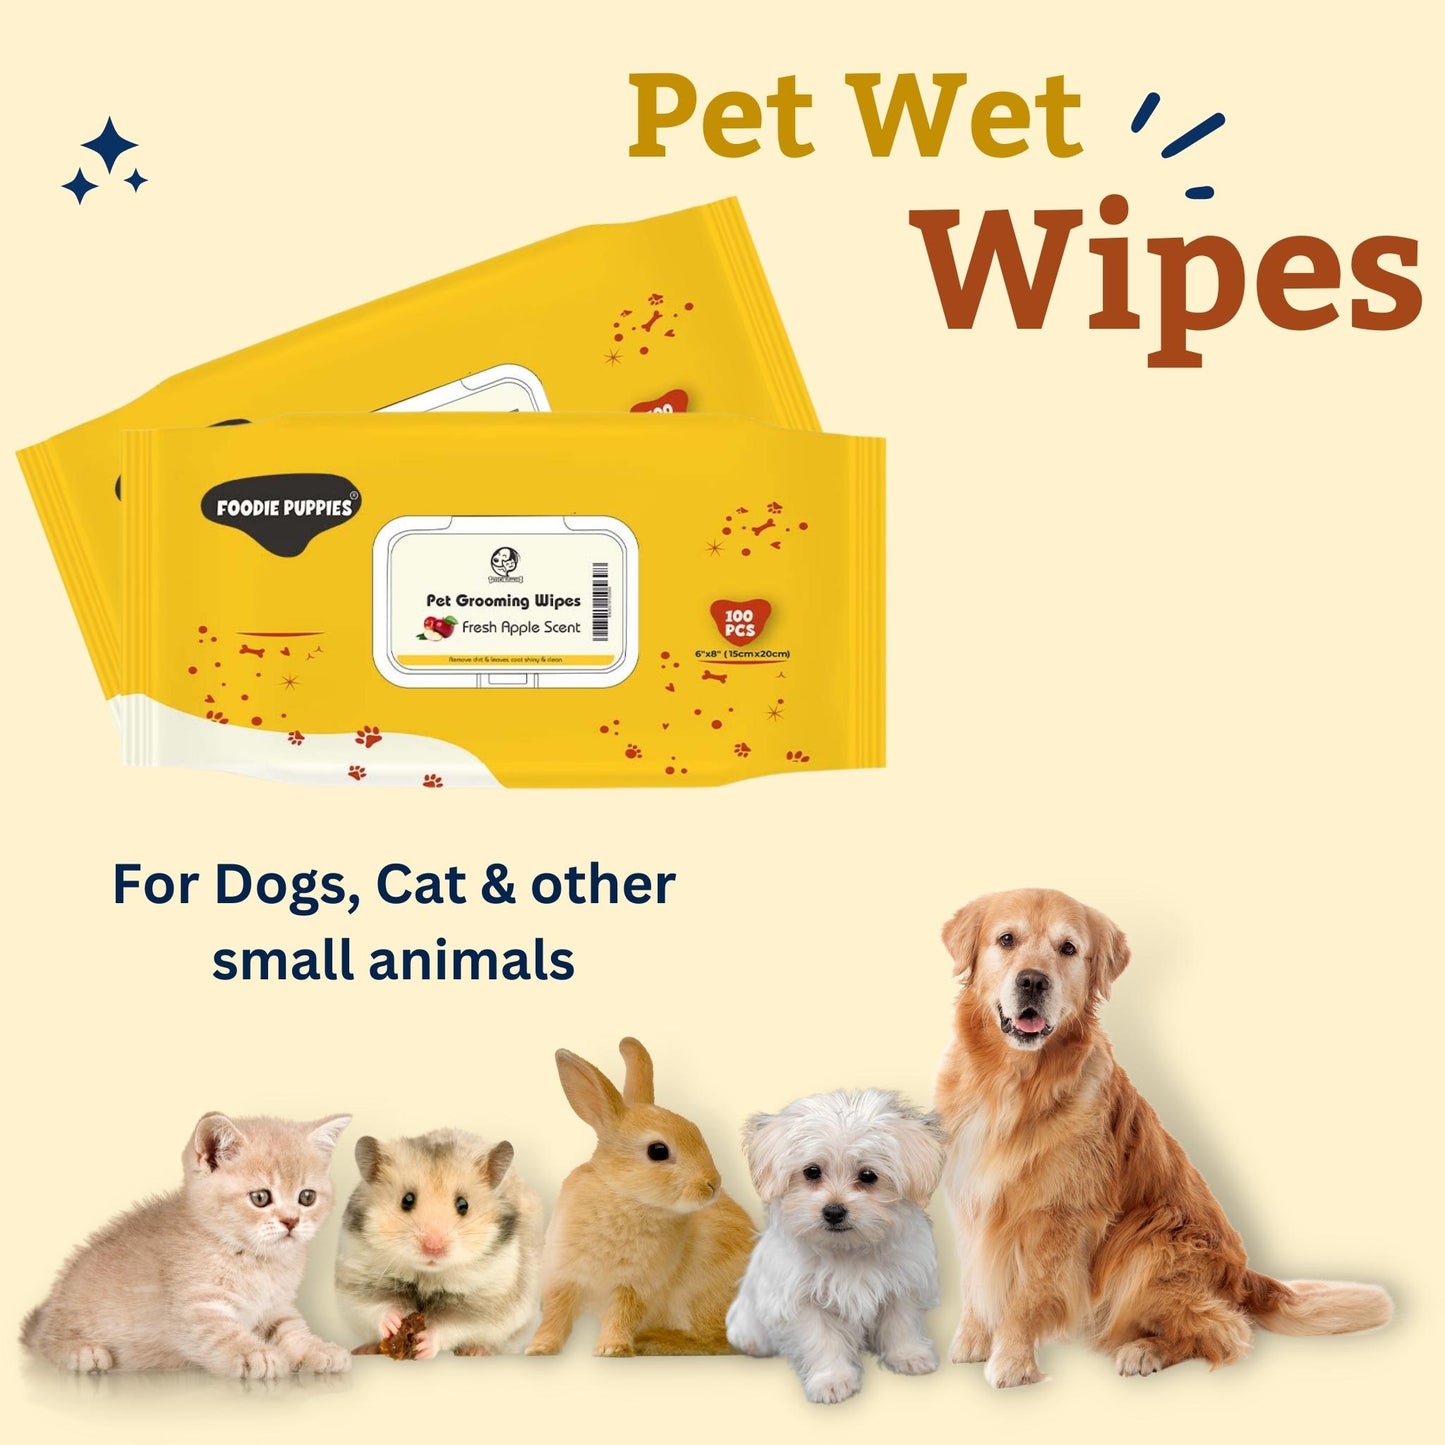 Foodie Puppies Fresh Apple Wet Wipes for Dogs & Puppies